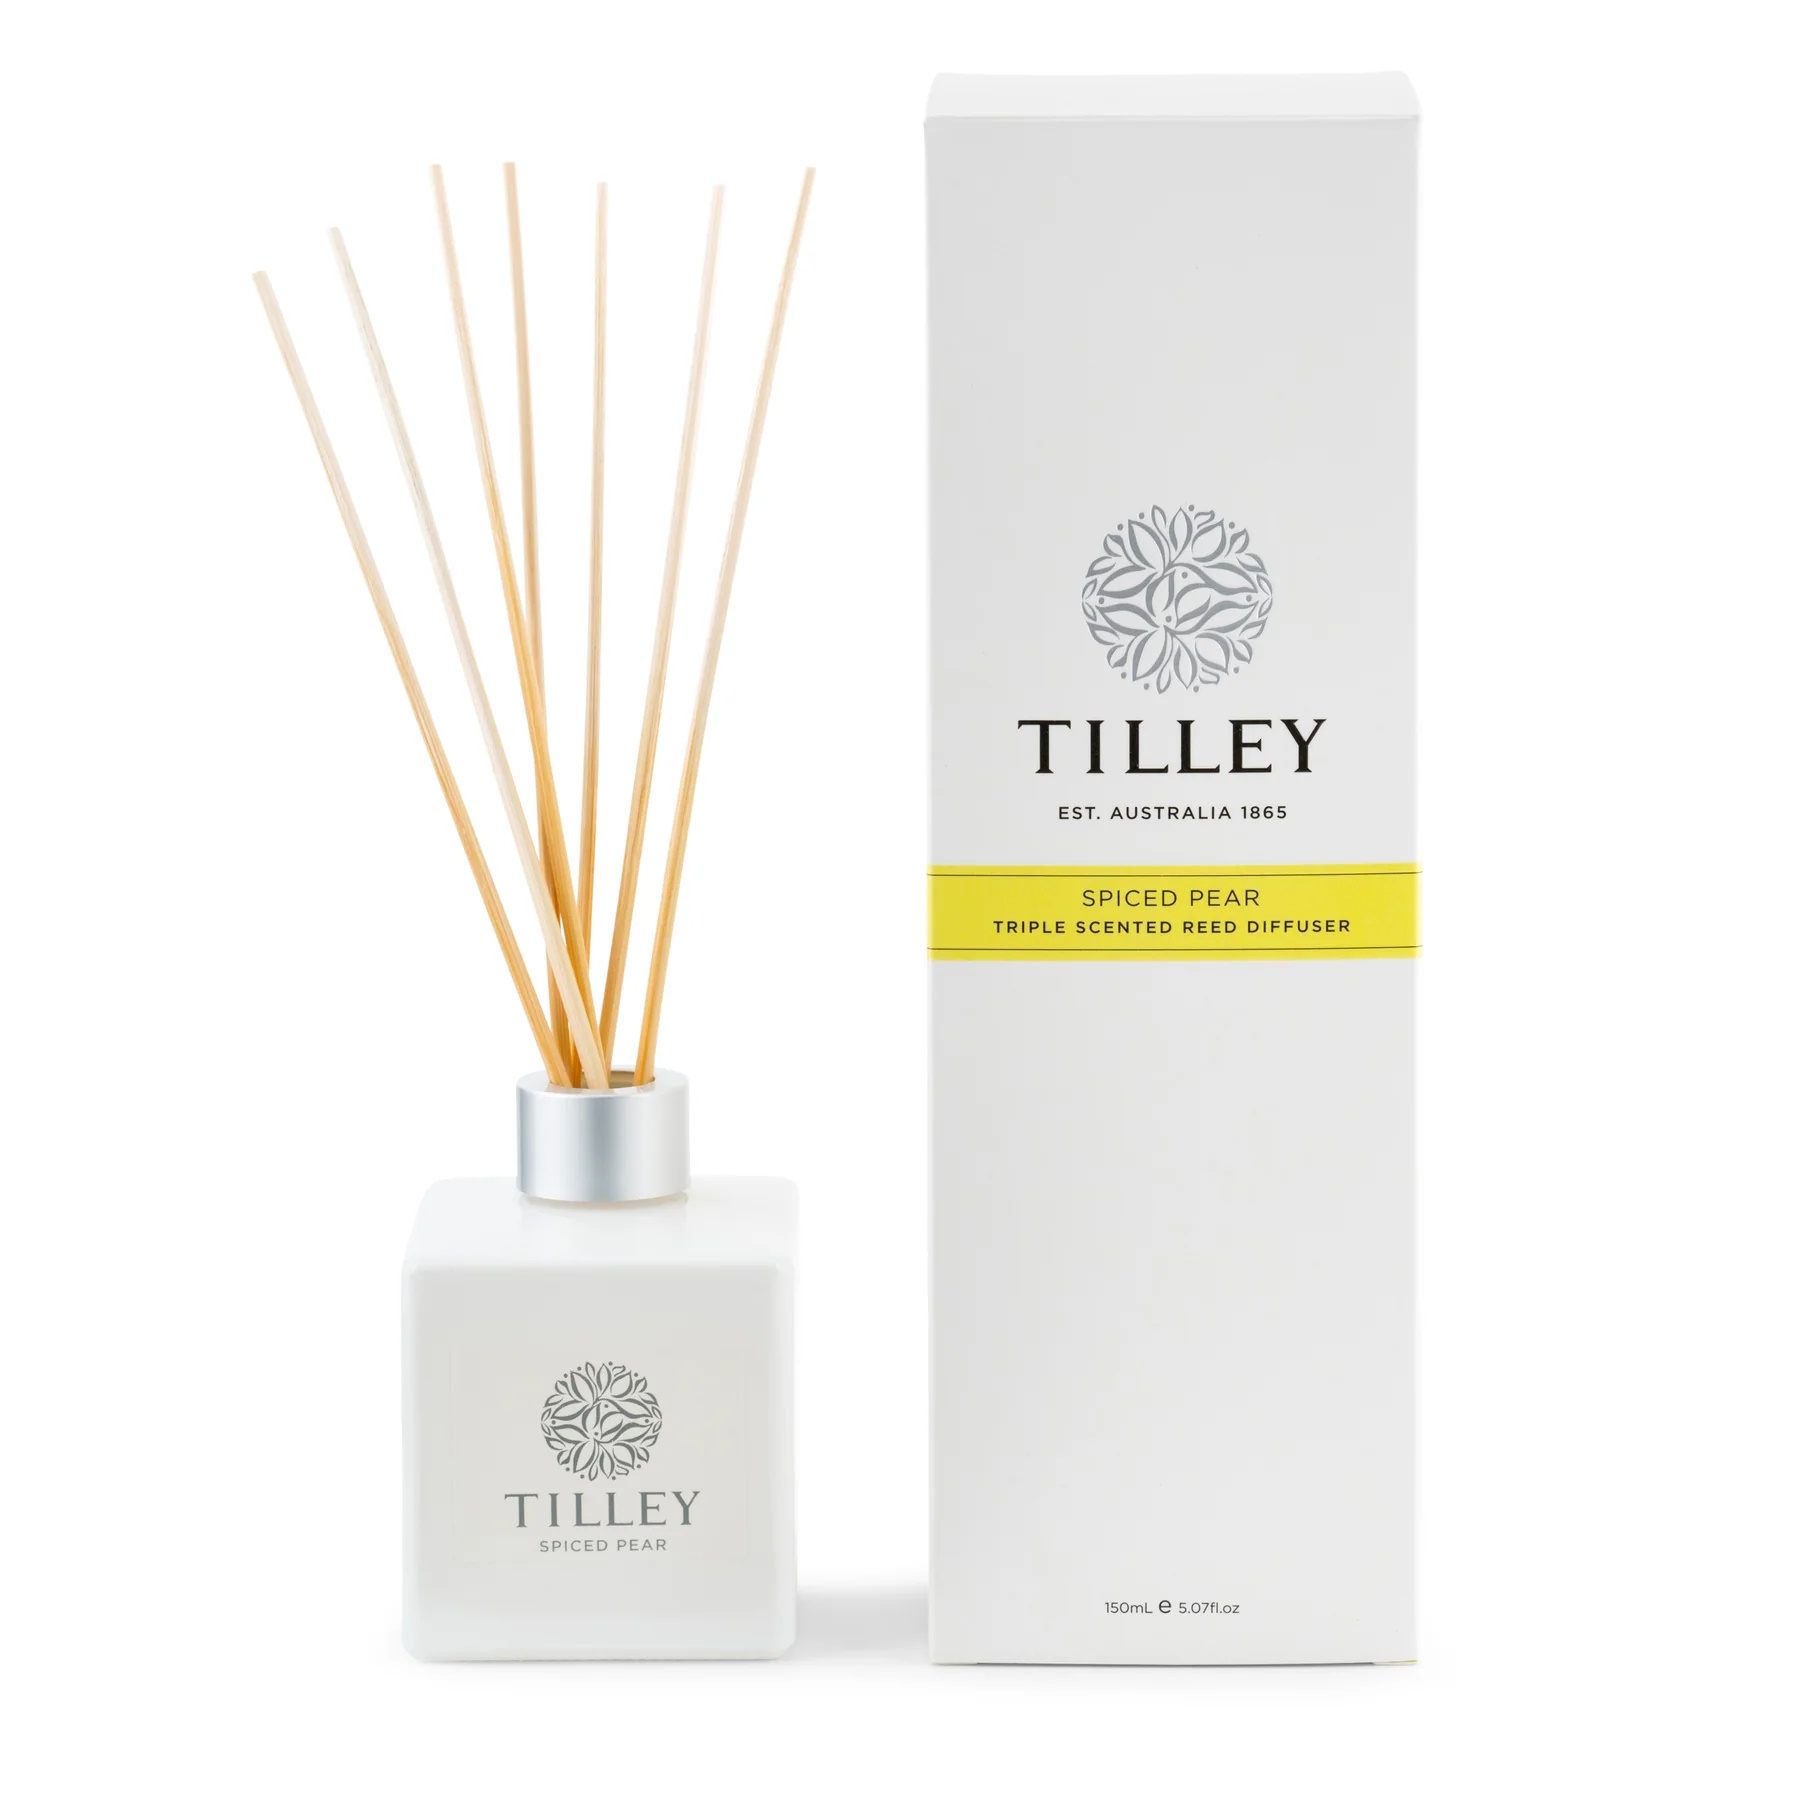 Tilley Classic White Reed Diffuser 150ml Spiced Pear